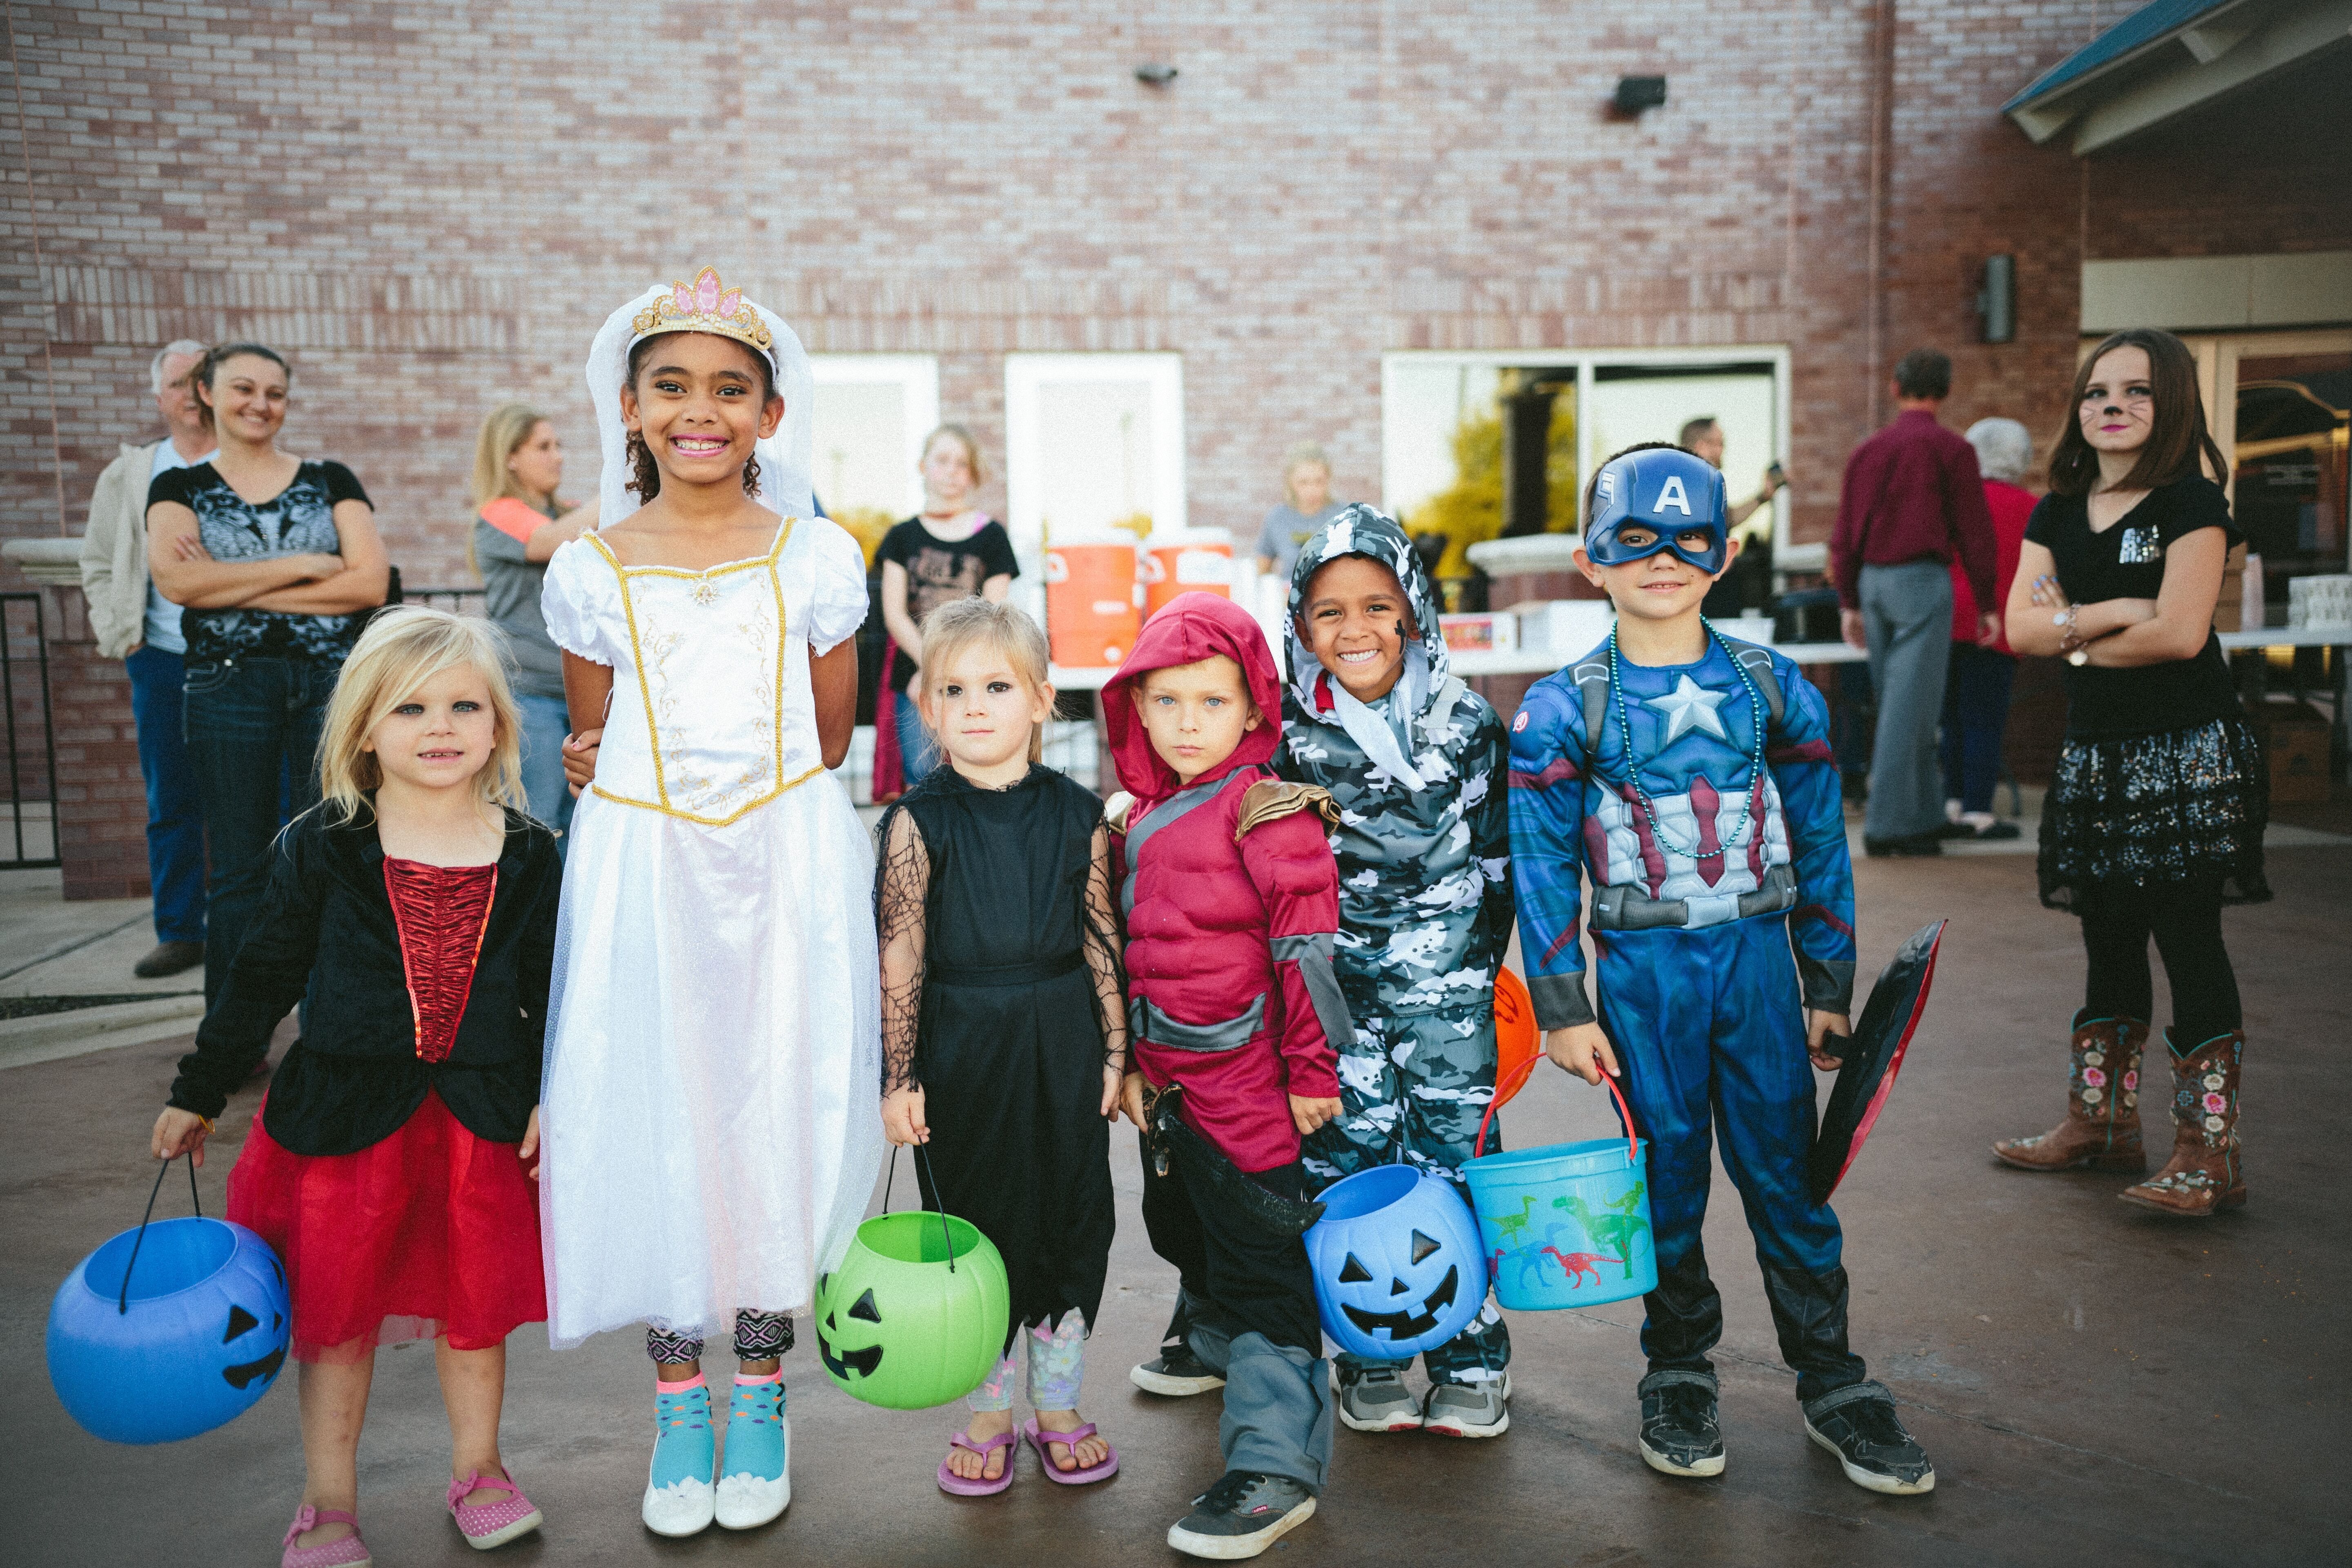 Tips to Create an Inclusive Halloween for All Children